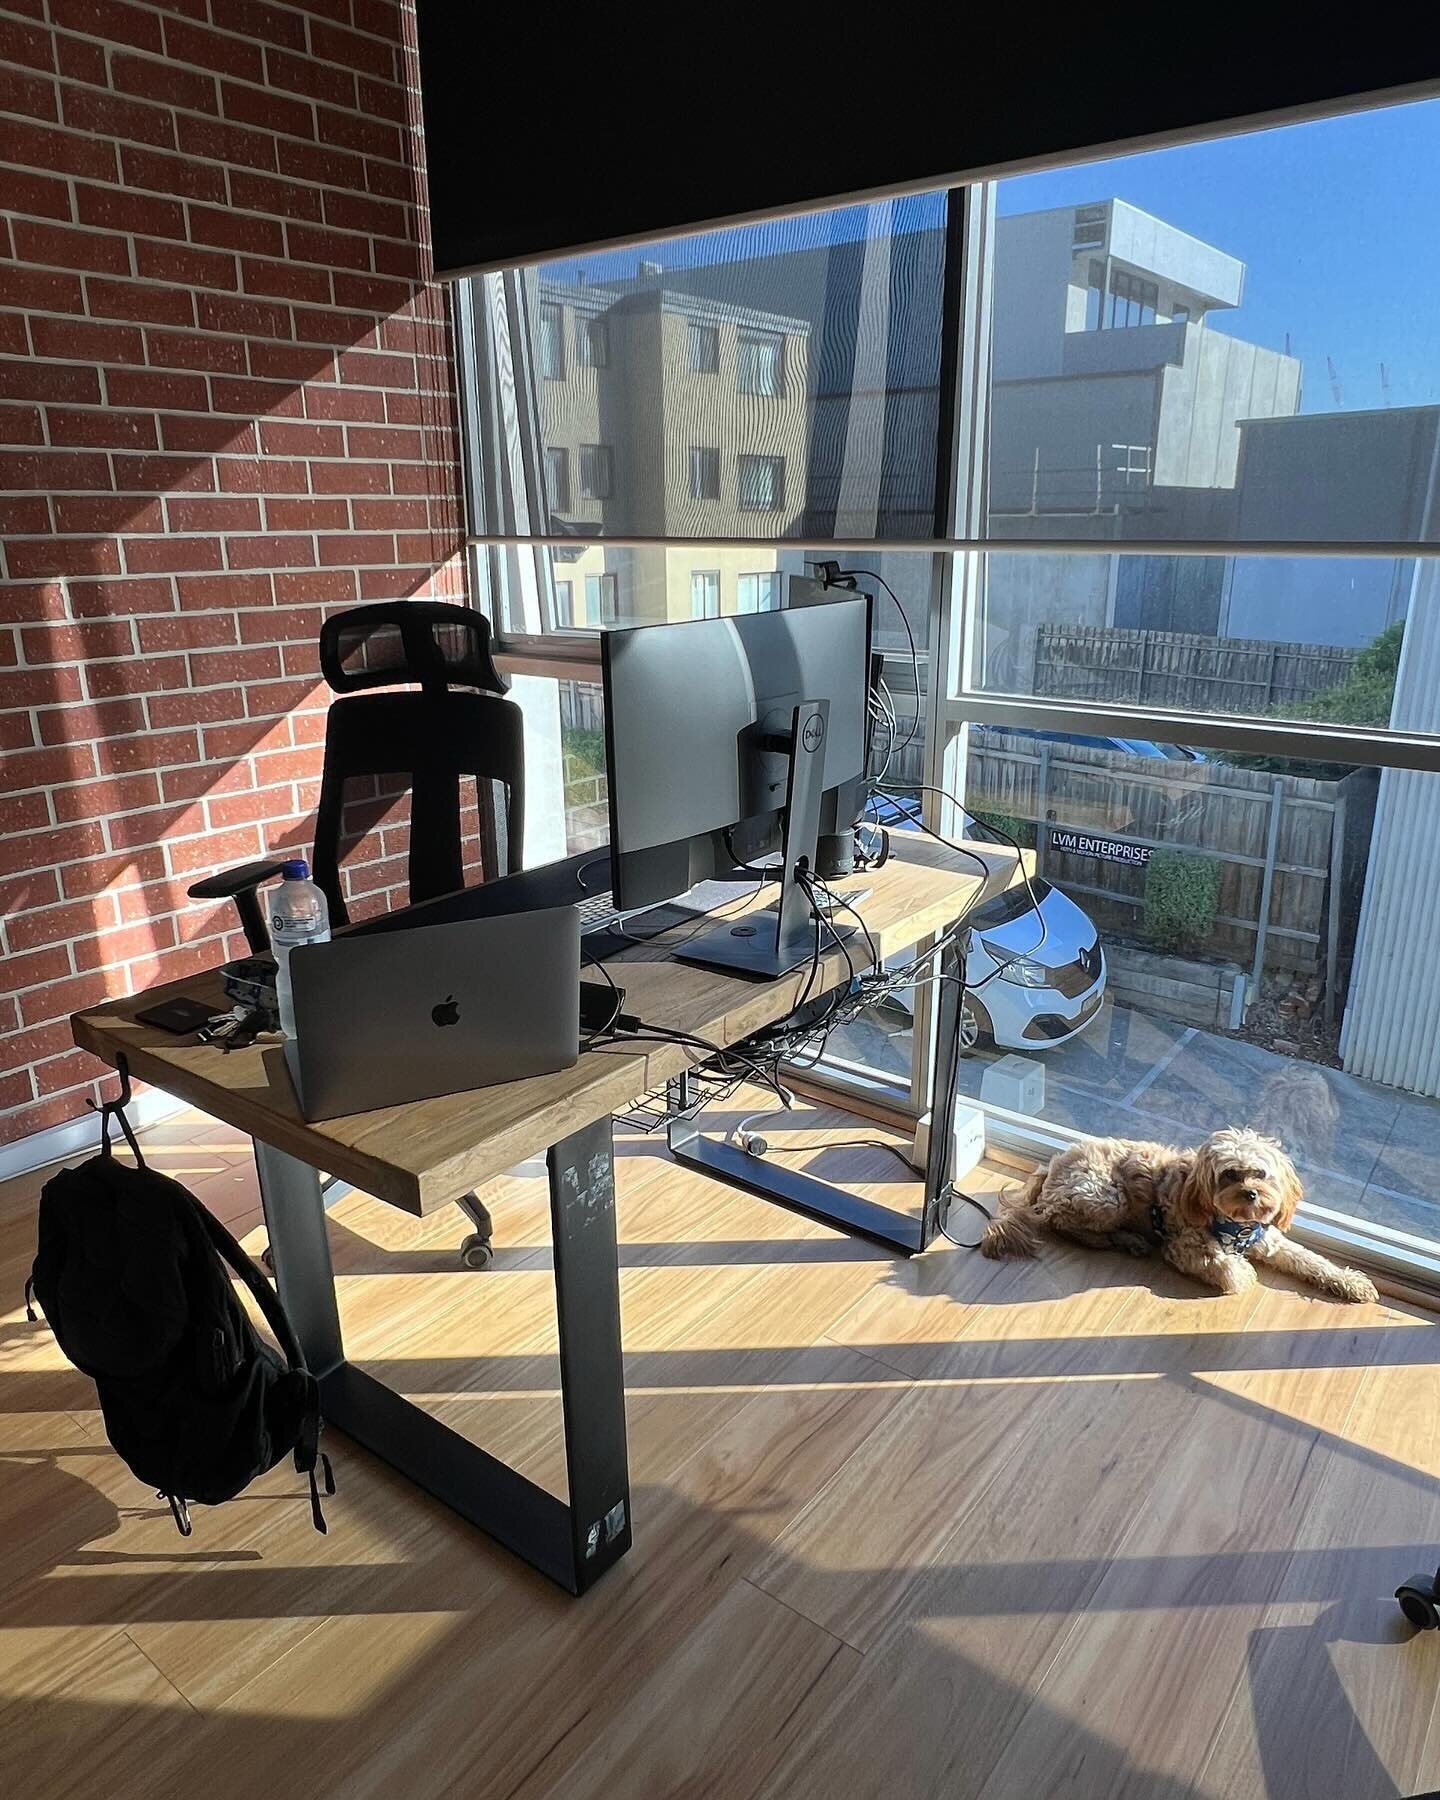 Luke&rsquo;s sun-filled pre-production battlestation is all set up and ready to tackle the world one shoot at a time! 

* Pre Production
* Writing / Scripting
* Shot list
* Creative development
* Design
* Puppy guard